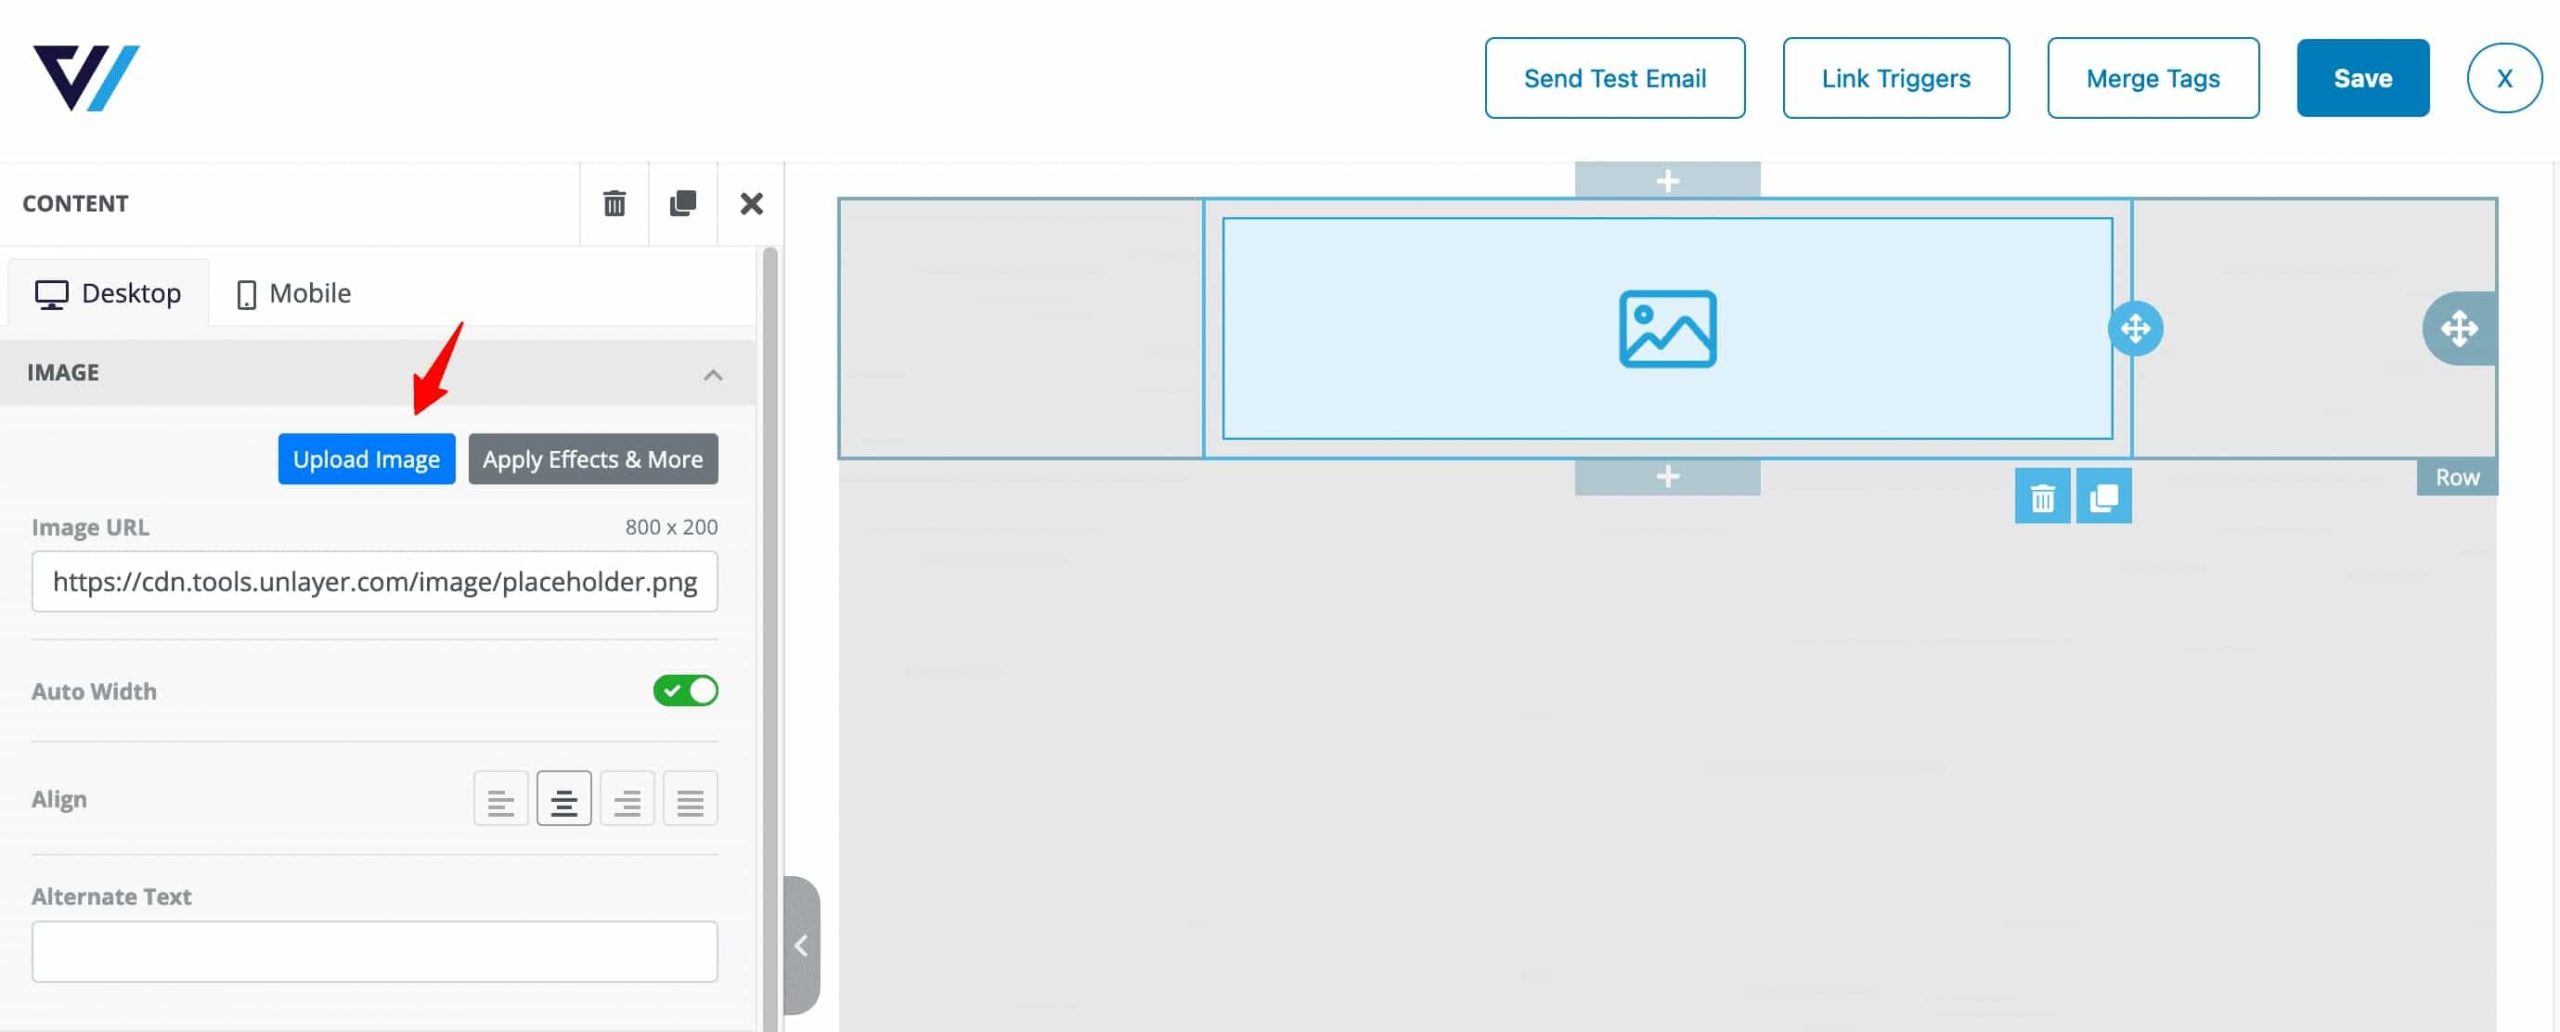 Upload the image logo of your website while designing your cart abandonment email and subject line 